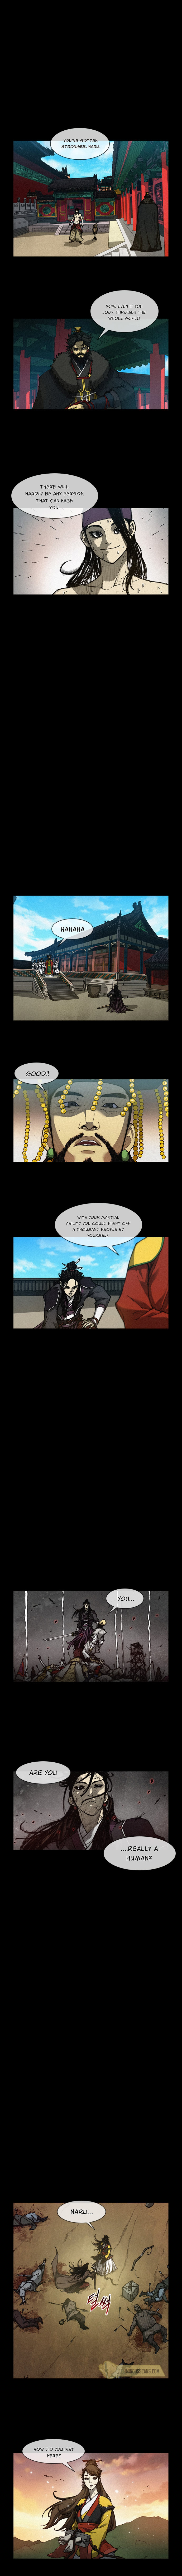 Long Way of the Warrior - Chapter 6 Page 2